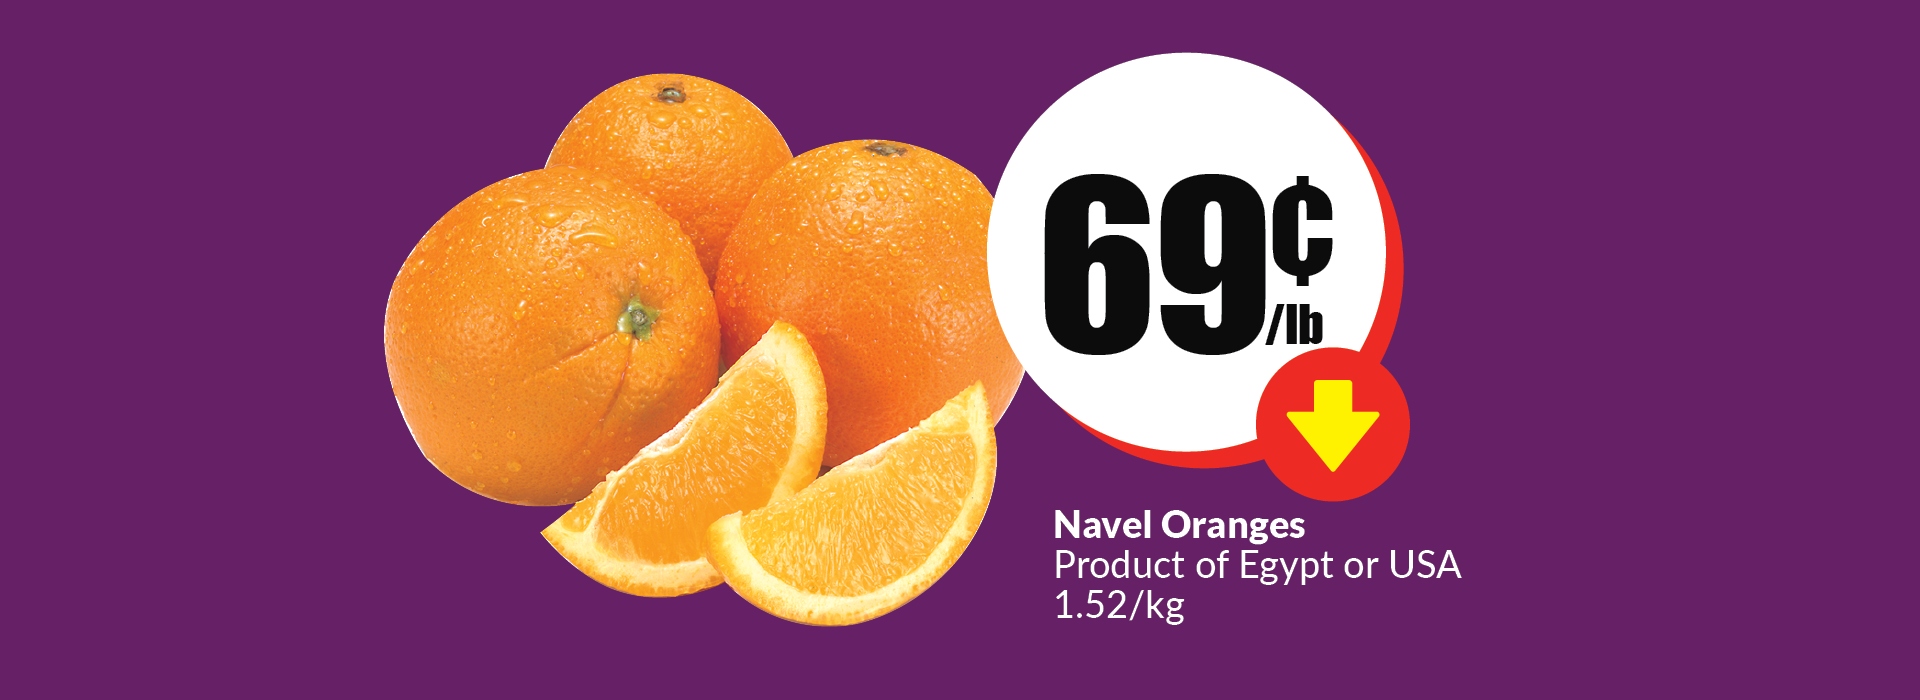 This image has the following text: Navel Oranges Product of Egypt or USA 1.52/Kg, Get them at just 69 cent/lb.